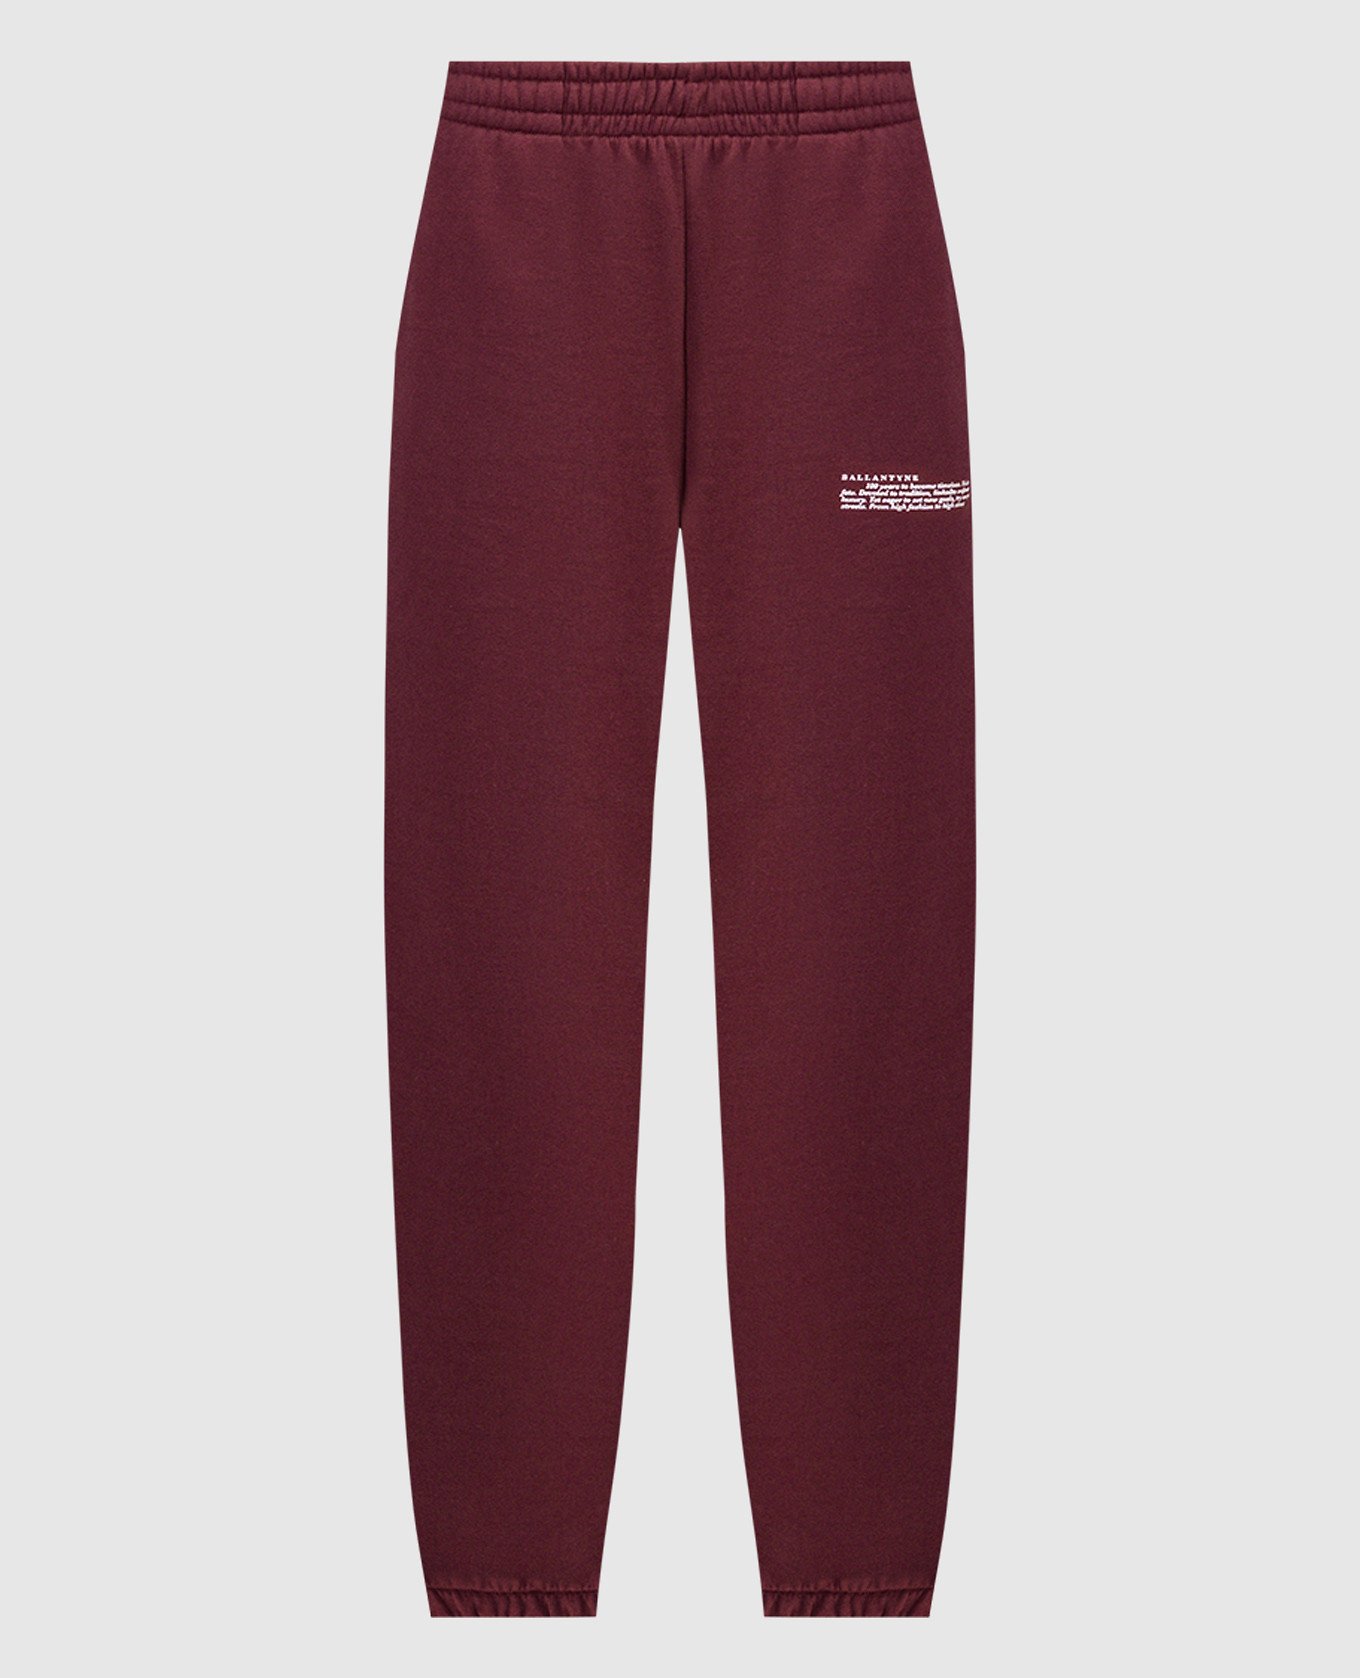 Burgundy joggers with contrasting logo